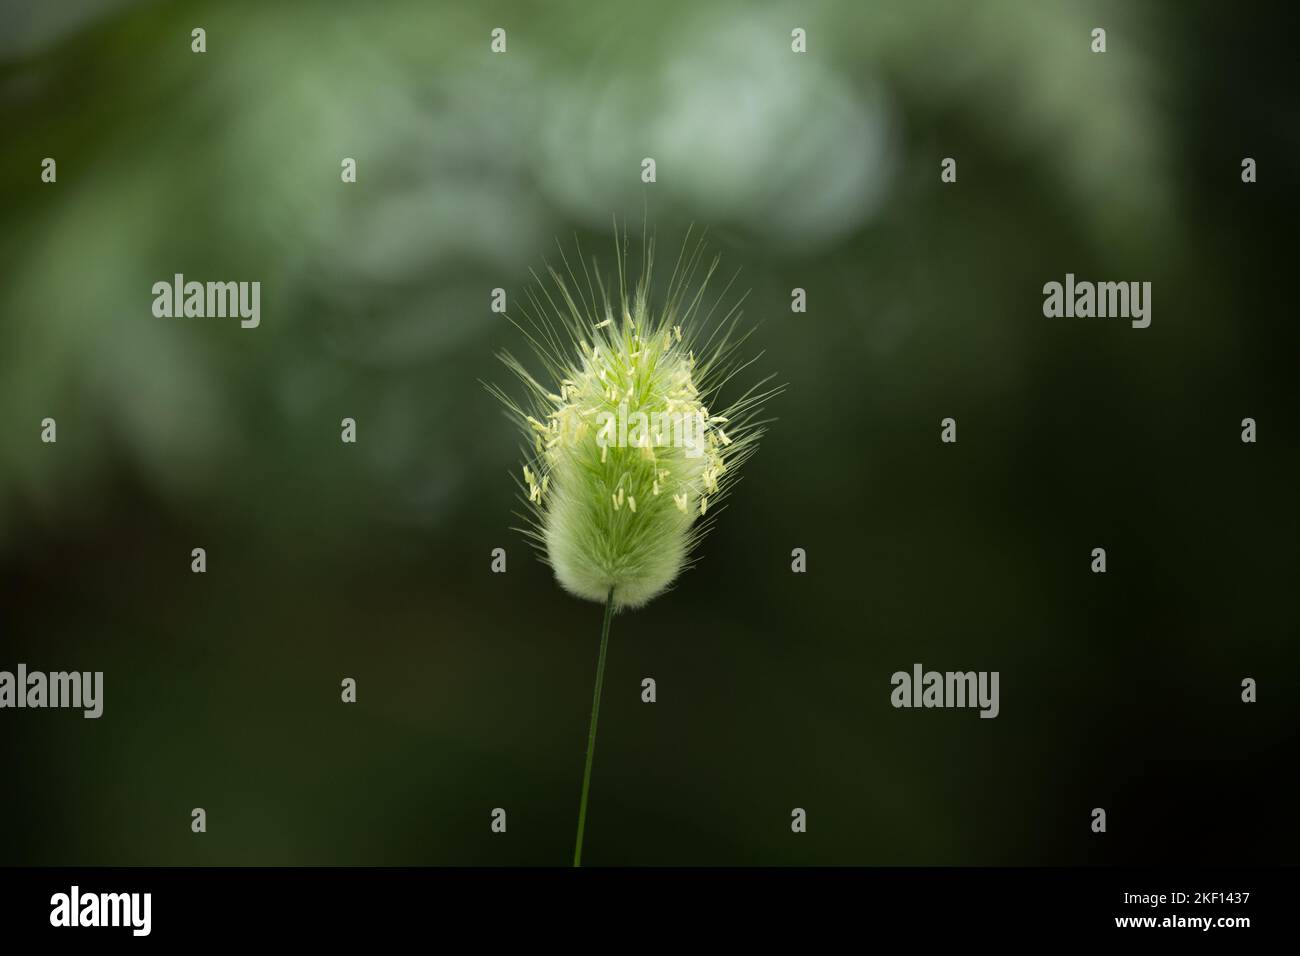 A single pale green velvety grass with a fluffy inflorescence in the middle of the picture with bokeh effect and copyspace on right side and below. Stock Photo